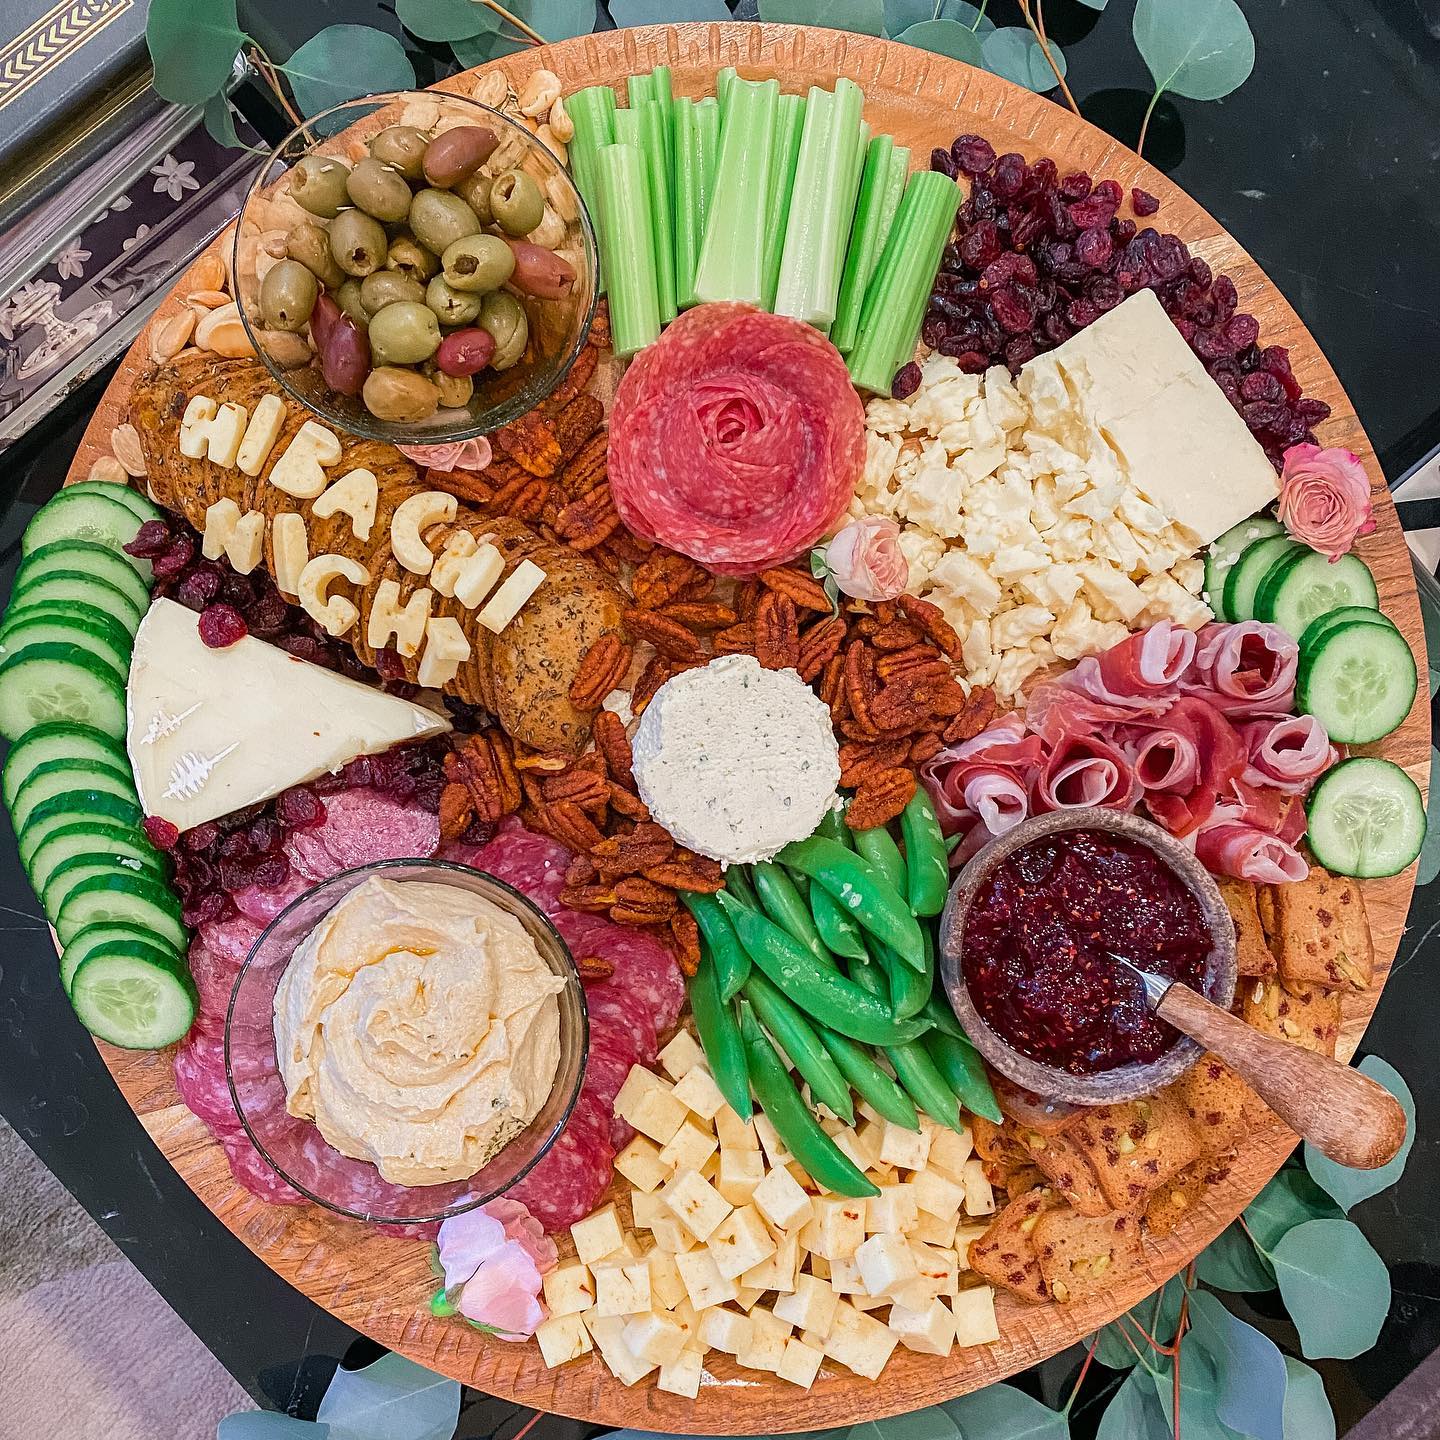 put together this cheesy spread for a friend’s birthday hibachi celebration 🥢🔥 and got to try out my cutie new letter cutters! don’t you love? 

I love making cheese & charcuterie boards for friends and guess what? they’re totally customizable! if you’re local to dallas keep me in mind for your next soirée 🧀🍇🥖DM me for pricing, options + availability 💌

#cheeseboards #cheeseboardsofinstagram #charcuterieboard #charcuterie #dallascheeseboards #dallascharcuterie